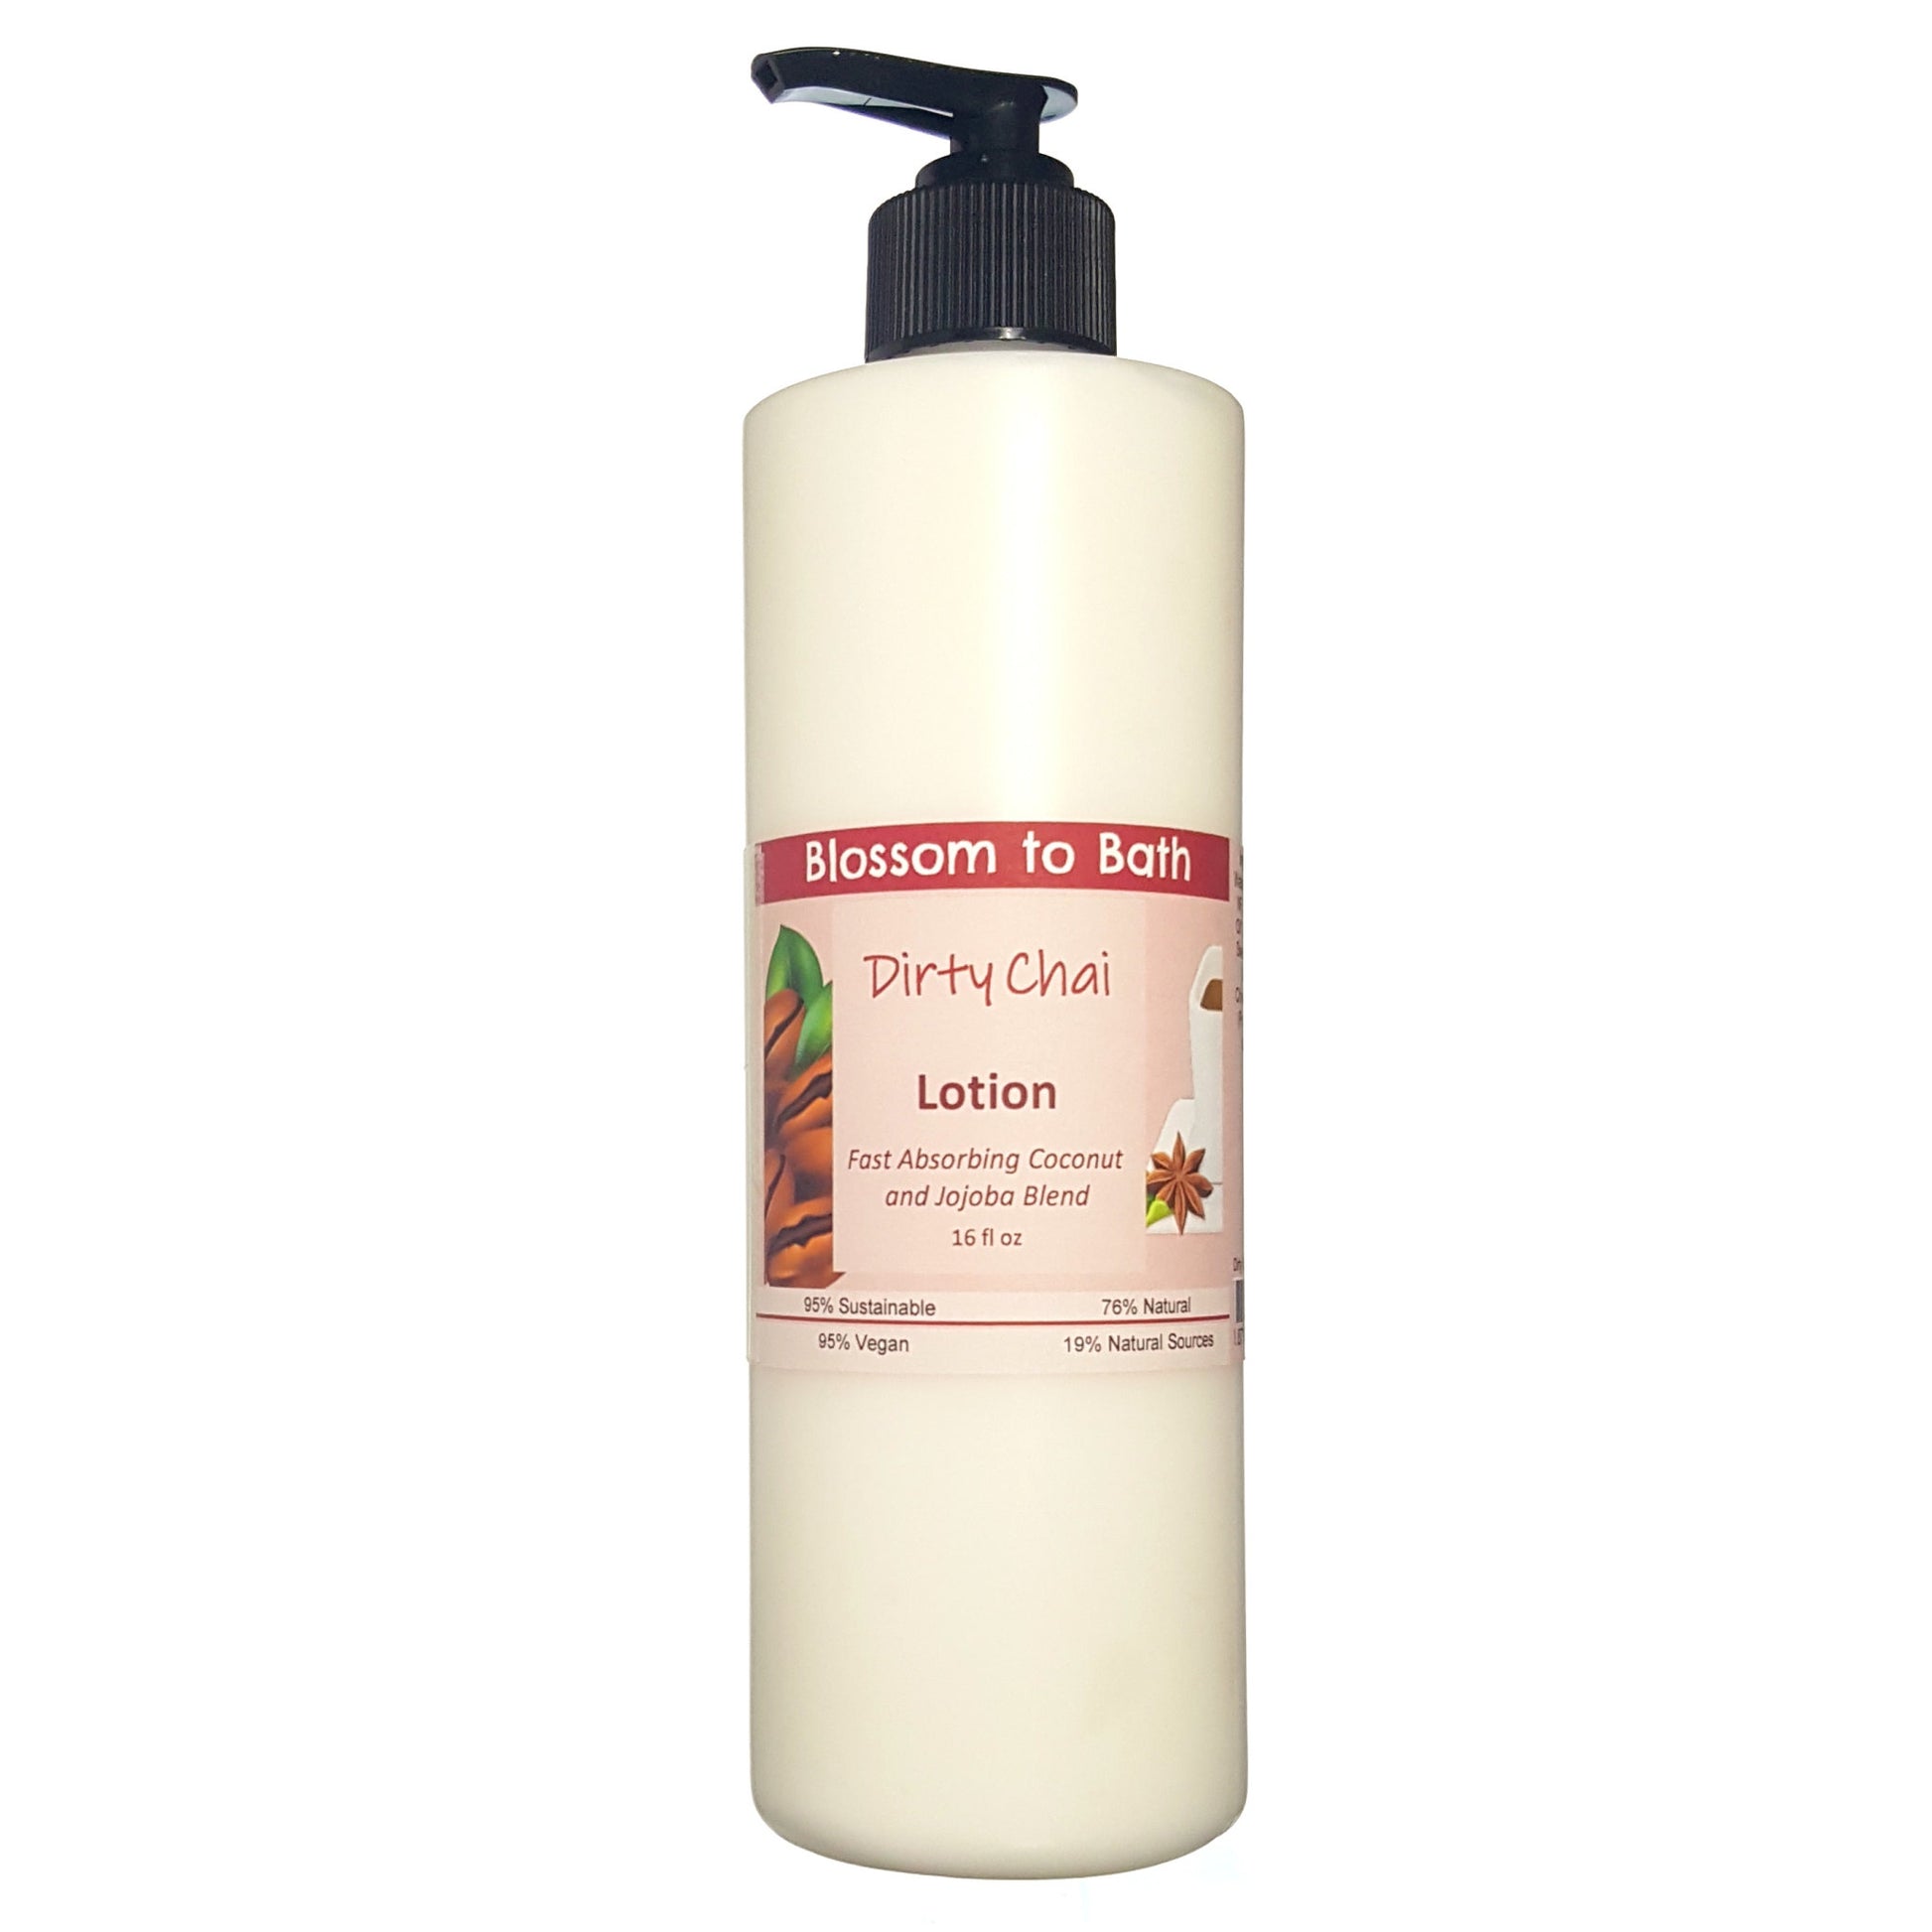 Buy Blossom to Bath Dirty Chai Lotion from Flowersong Soap Studio.  Daily moisture luxury that soaks in quickly made with organic oils and butters that soften and smooth the skin  A shot of rich espresso in a swirl of exotic warm clove and cardamom.